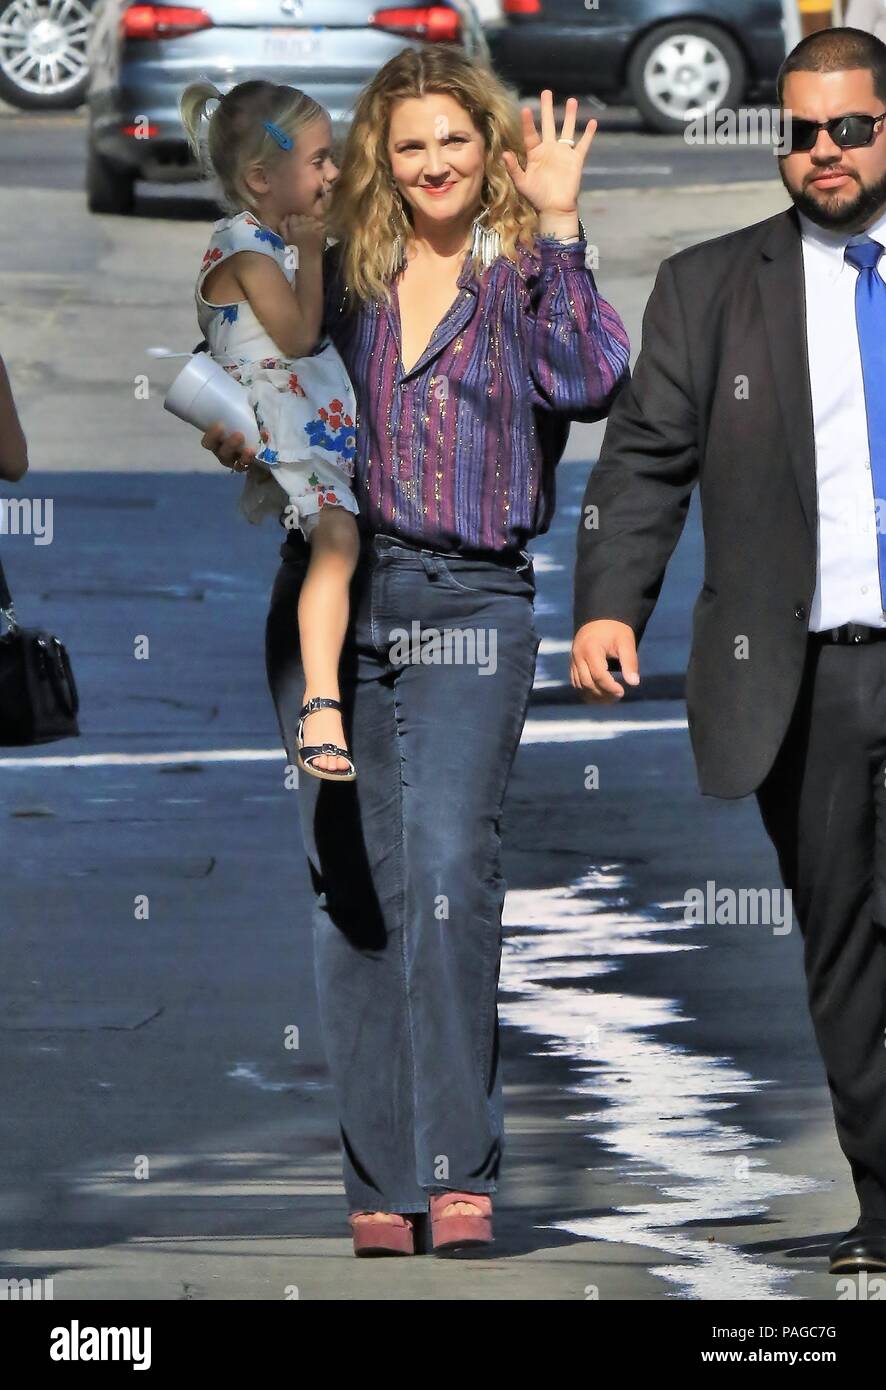 Celebrities arrive at the 'Jimmy Kimmel Live!' studios  Featuring: Drew Barrymore, Frankie Barrymore Kopelman Where: Los Angeles, California, United States When: 21 Jun 2018 Credit: WENN.com Stock Photo